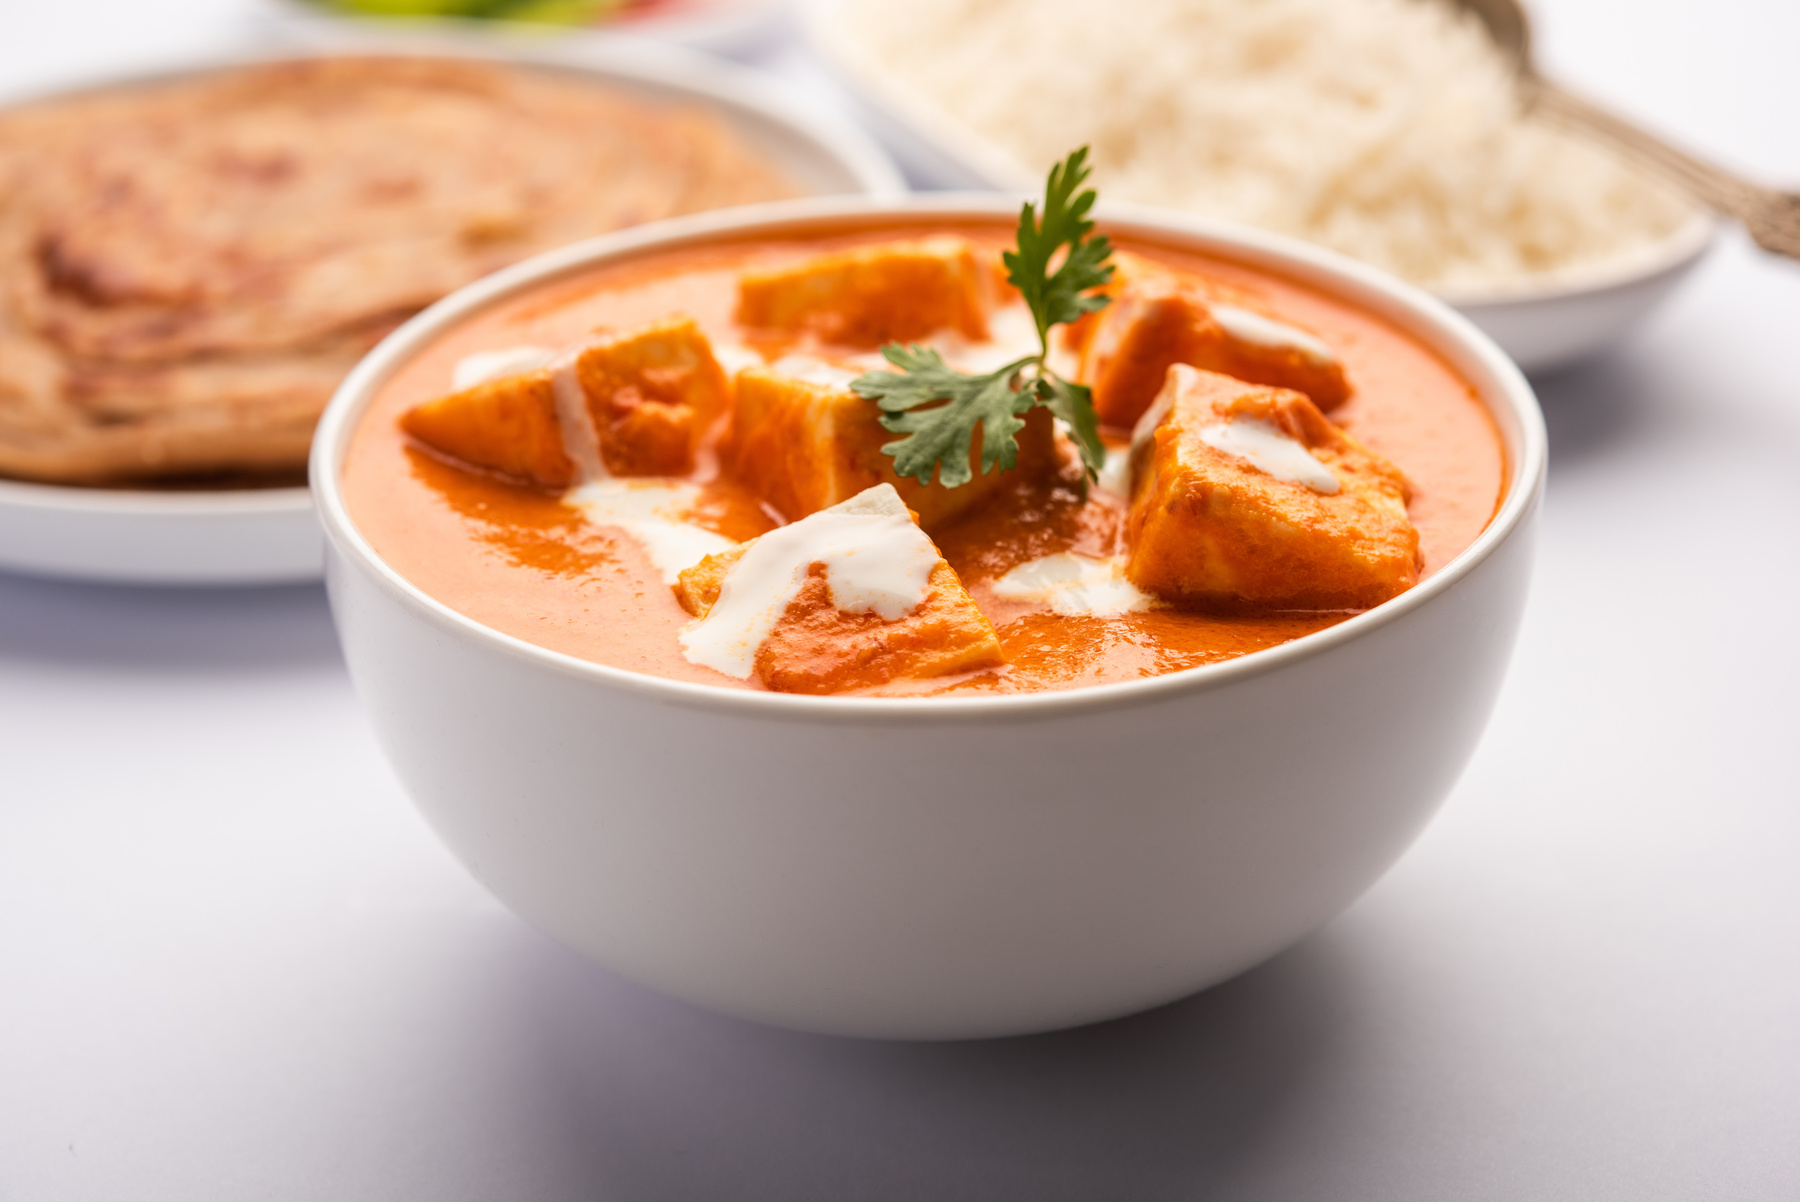 Butter Chicken order from Himalaya Granville for Indian Dinner Party